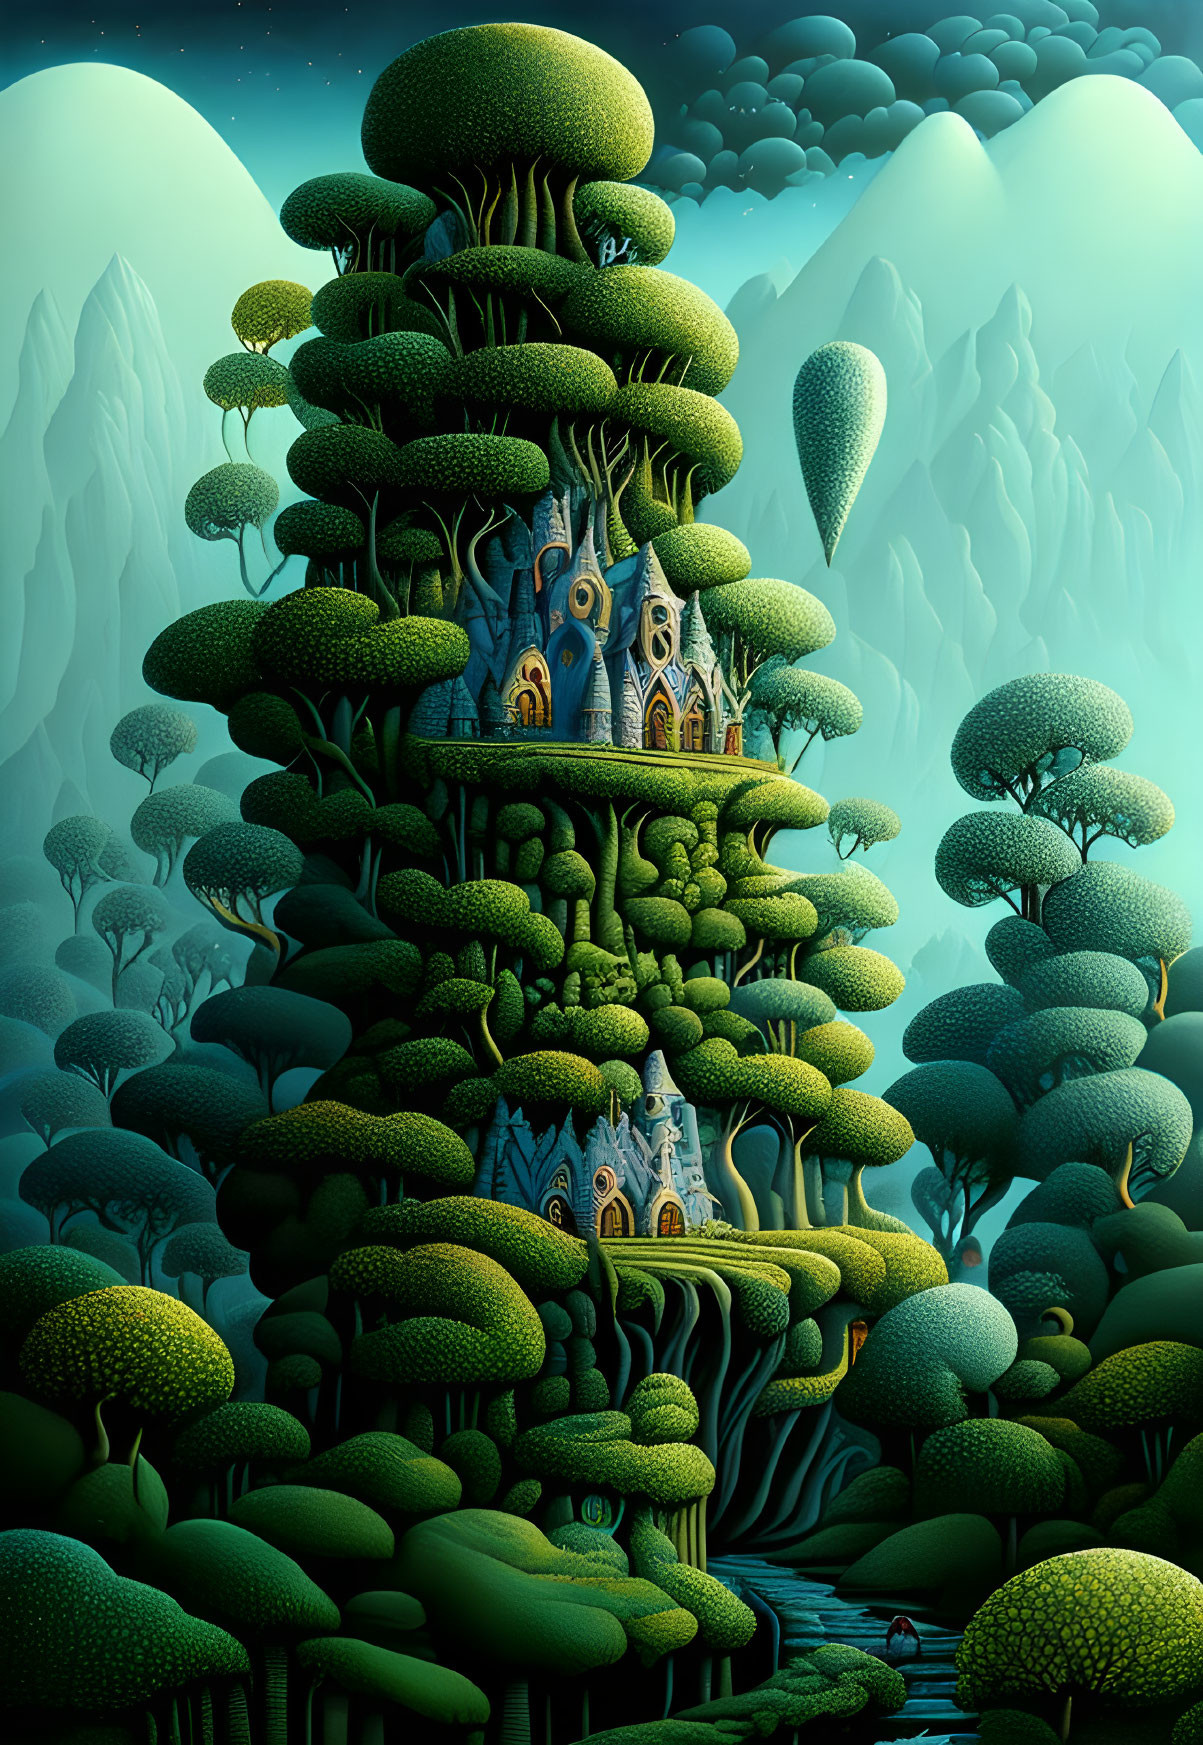 Whimsical tall tree with fairytale structures in lush green foliage